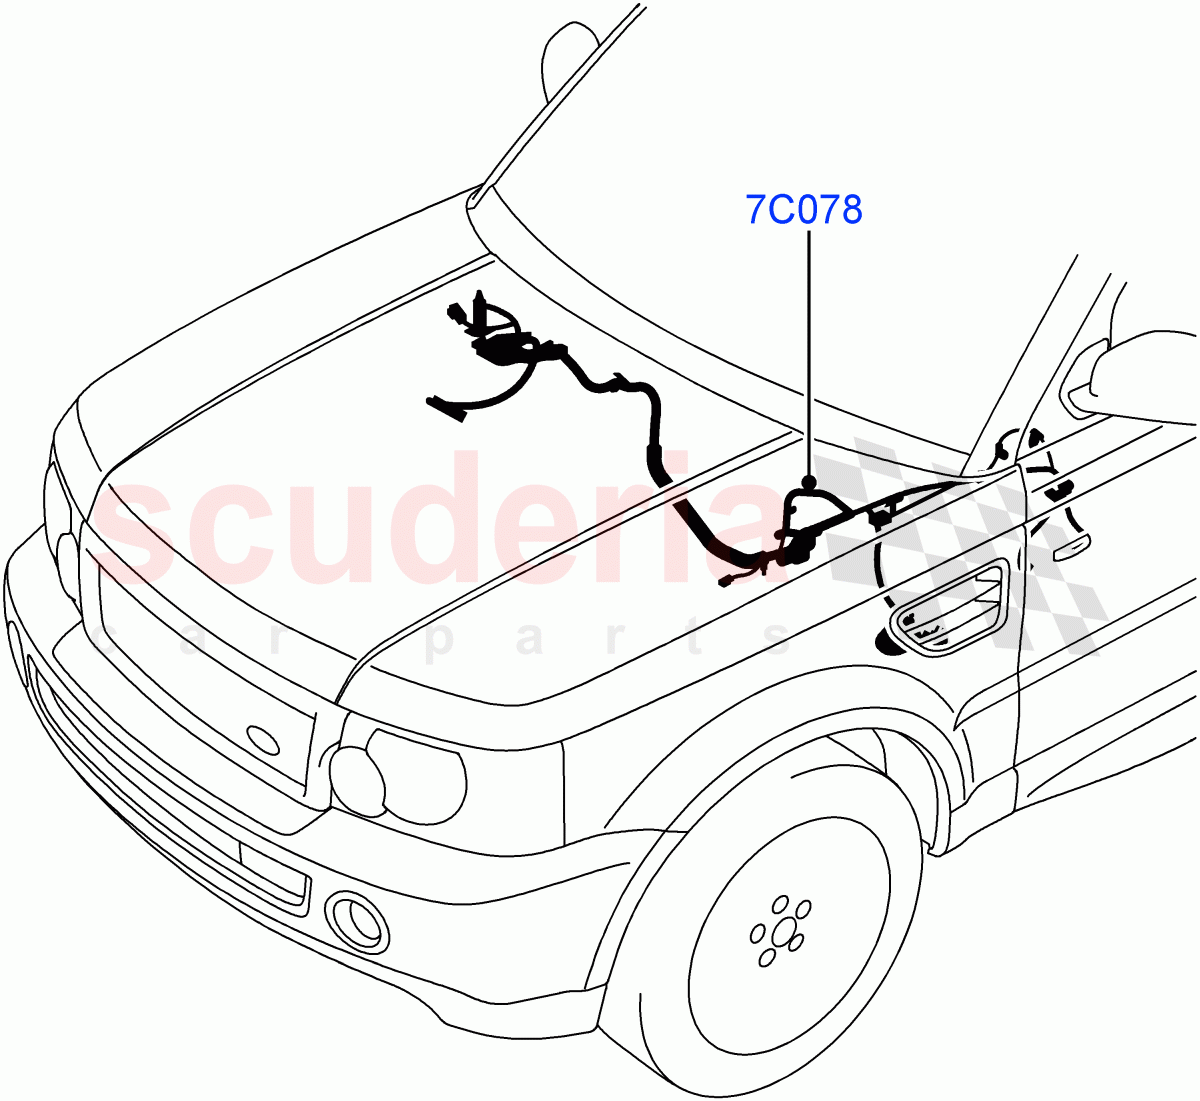 Electrical Wiring - Engine And Dash(Case Assy / Transmission)((V)TO9A999999) of Land Rover Land Rover Range Rover Sport (2005-2009) [4.4 AJ Petrol V8]